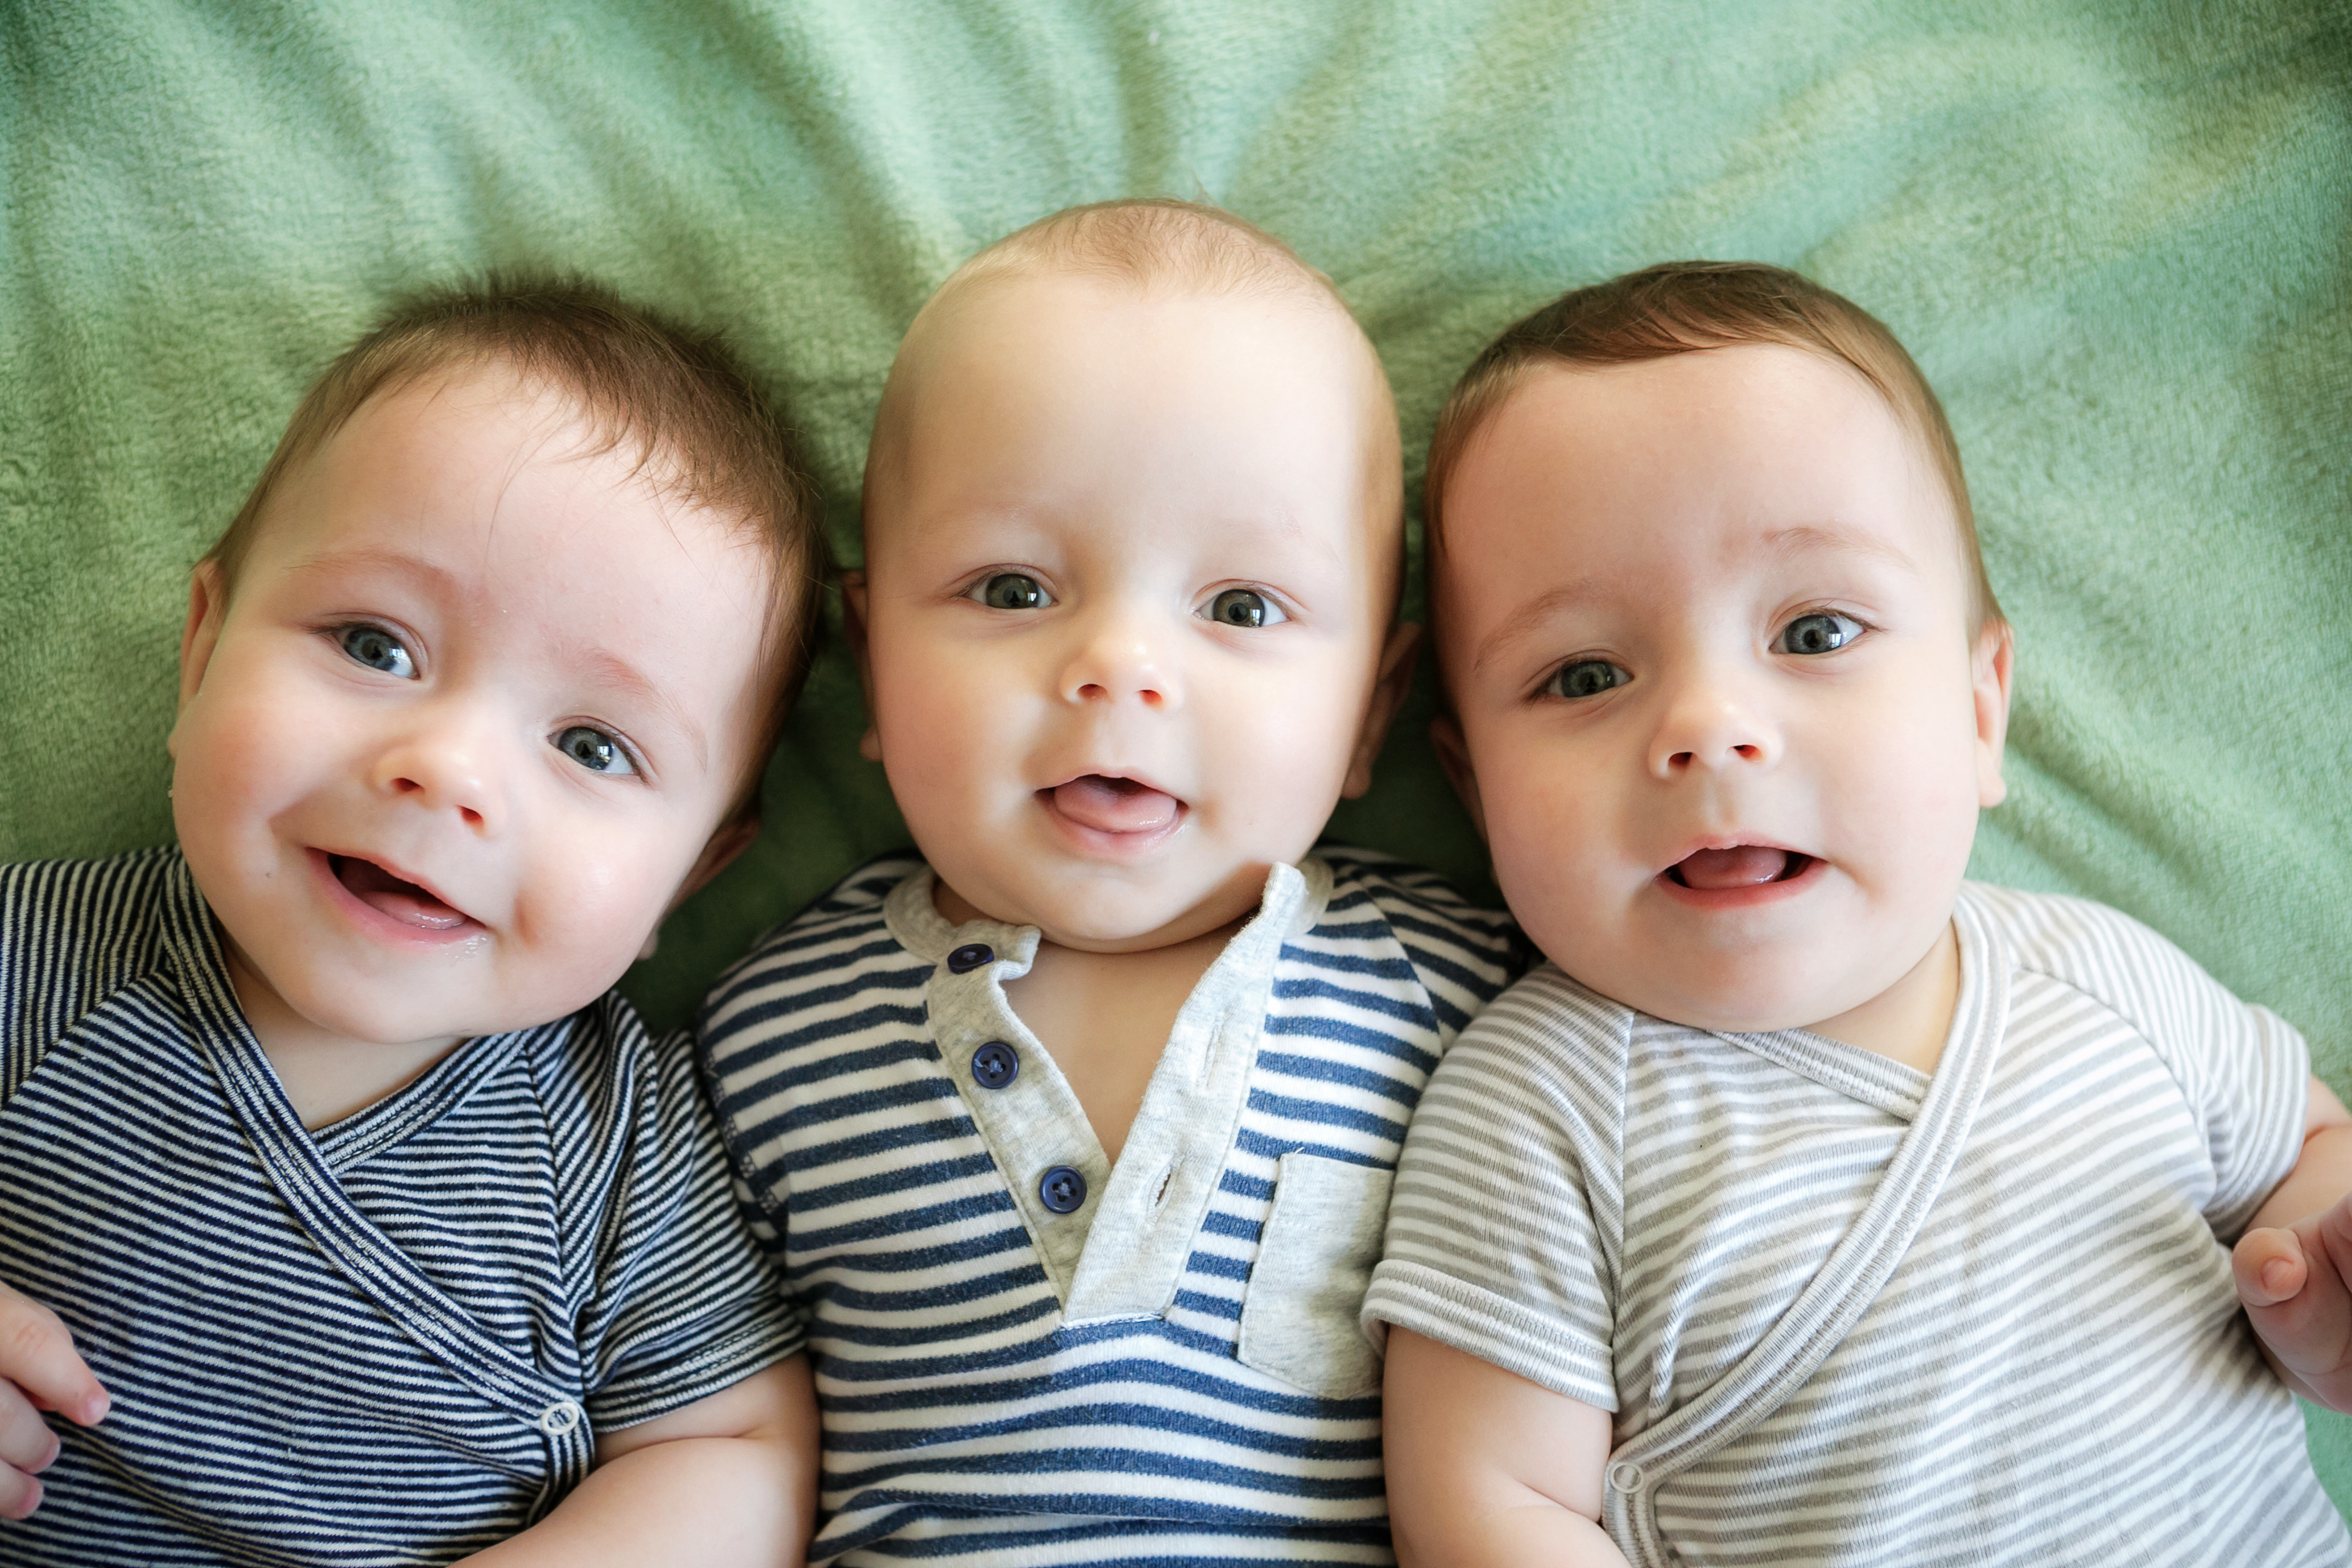 Triplet babies | Source: Getty Images